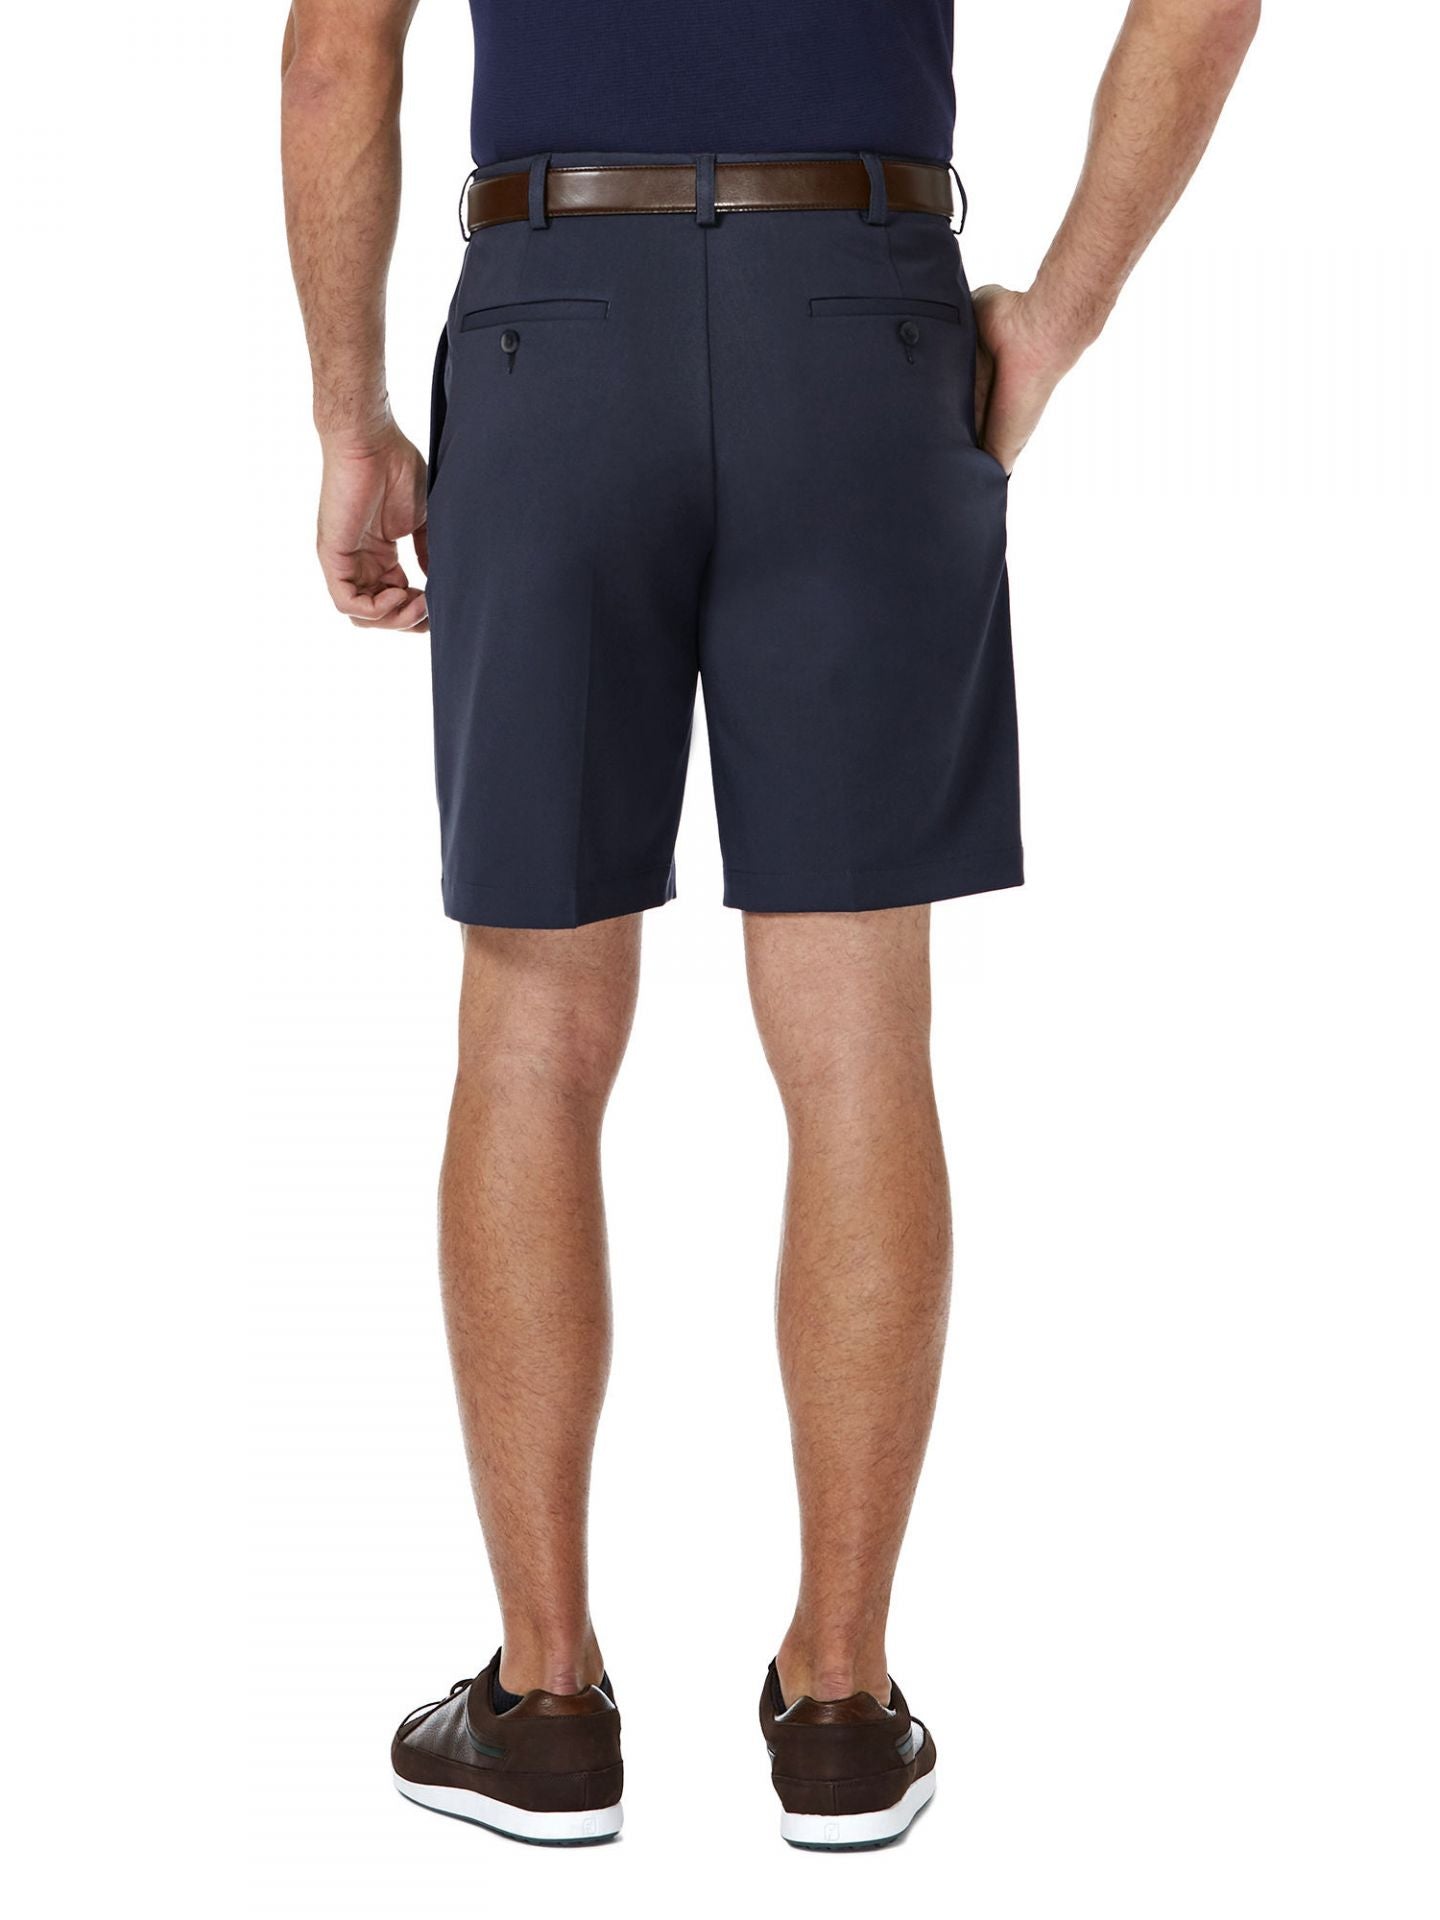 Cool 18 Pro Stretch Classic Pleated Front Shorts